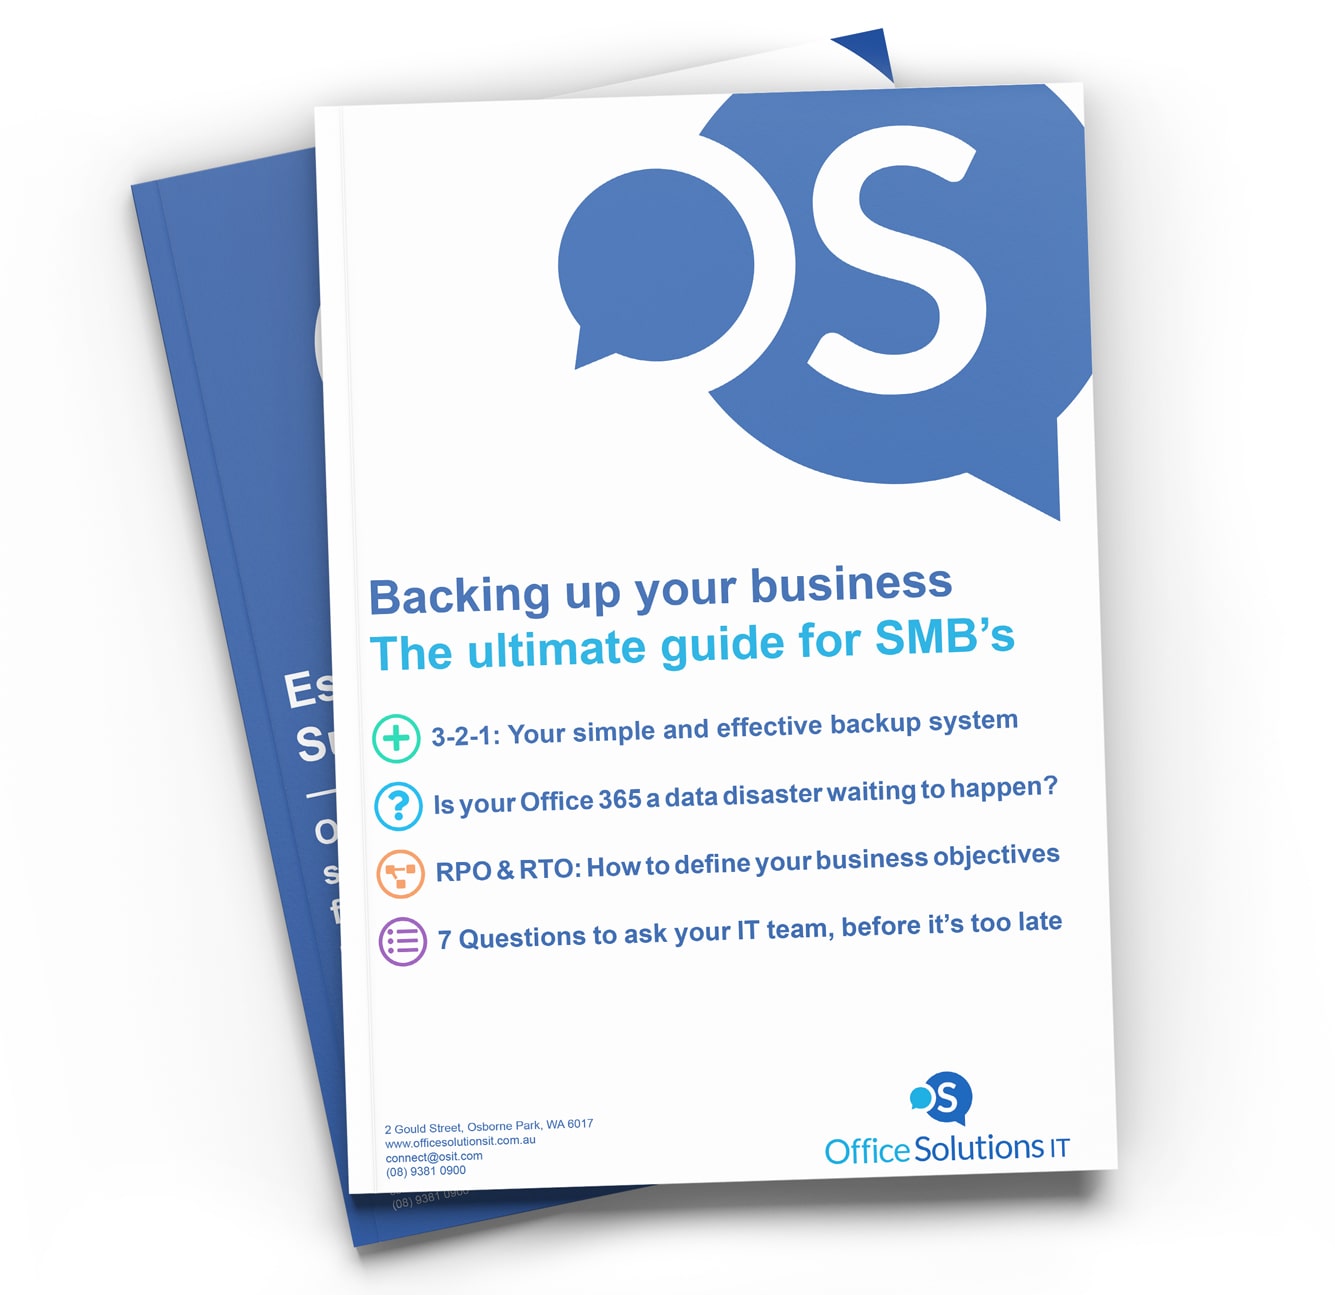 Backing up your SMB in 3-2-1